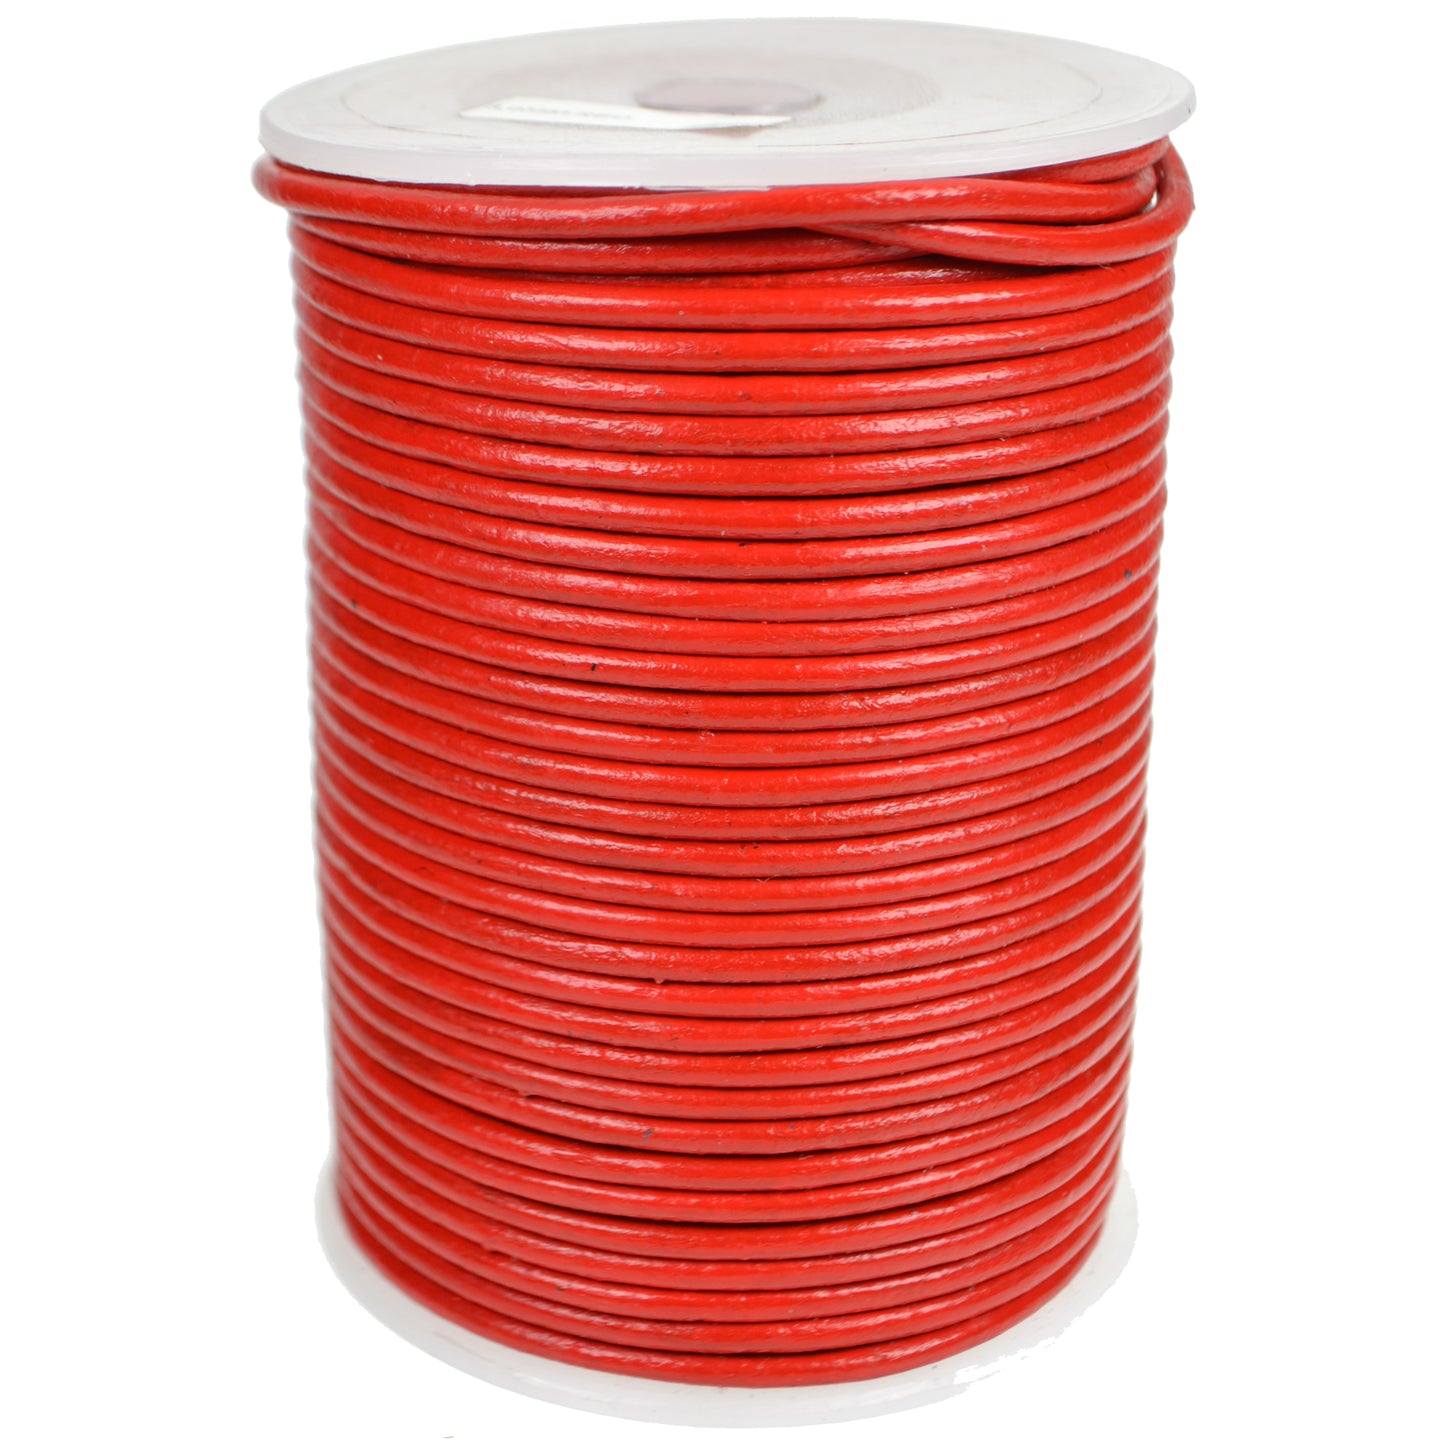 Round Leather Shoe Laces - Red 3mm